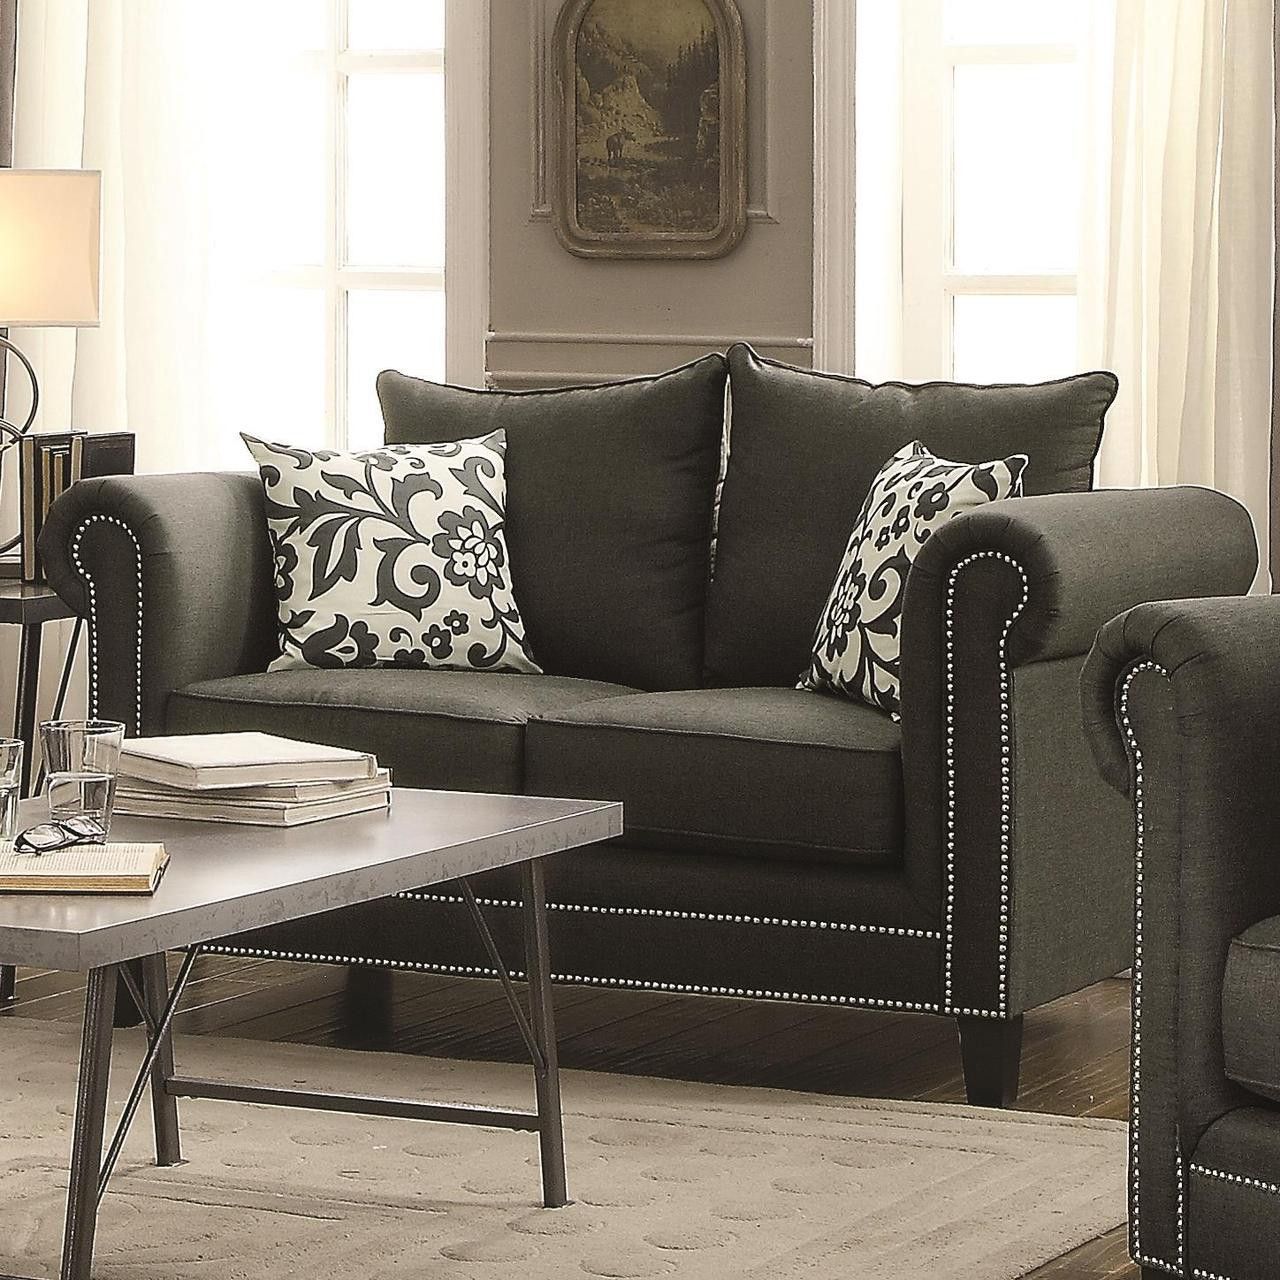 Beatrice Charcoal Linen Sofa And Loveseat – Cb Furniture In Light Charcoal Linen Sofas (Gallery 4 of 20)